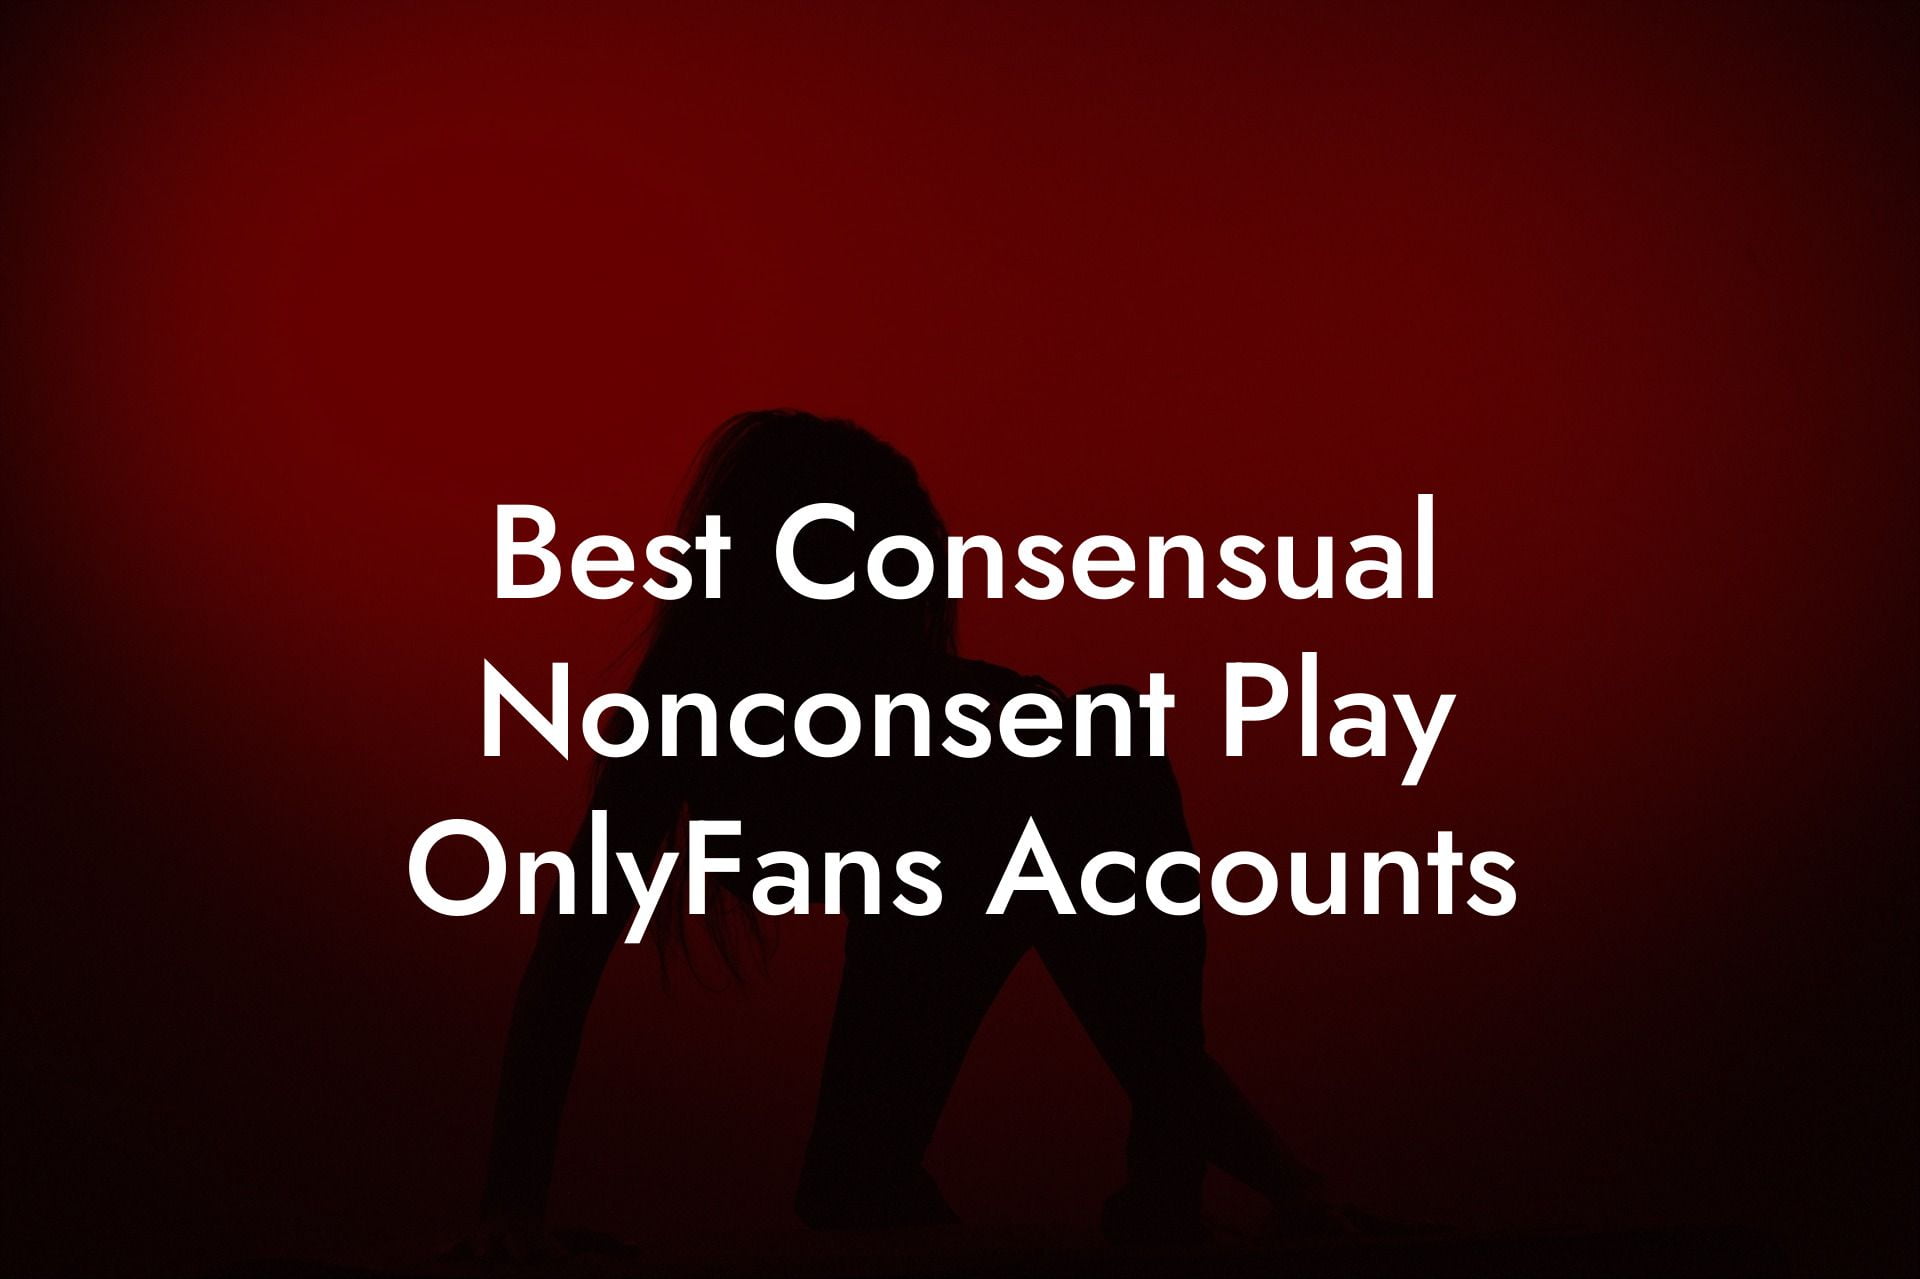 Best Consensual Nonconsent Play (CNC) OnlyFans Accounts picture pic image